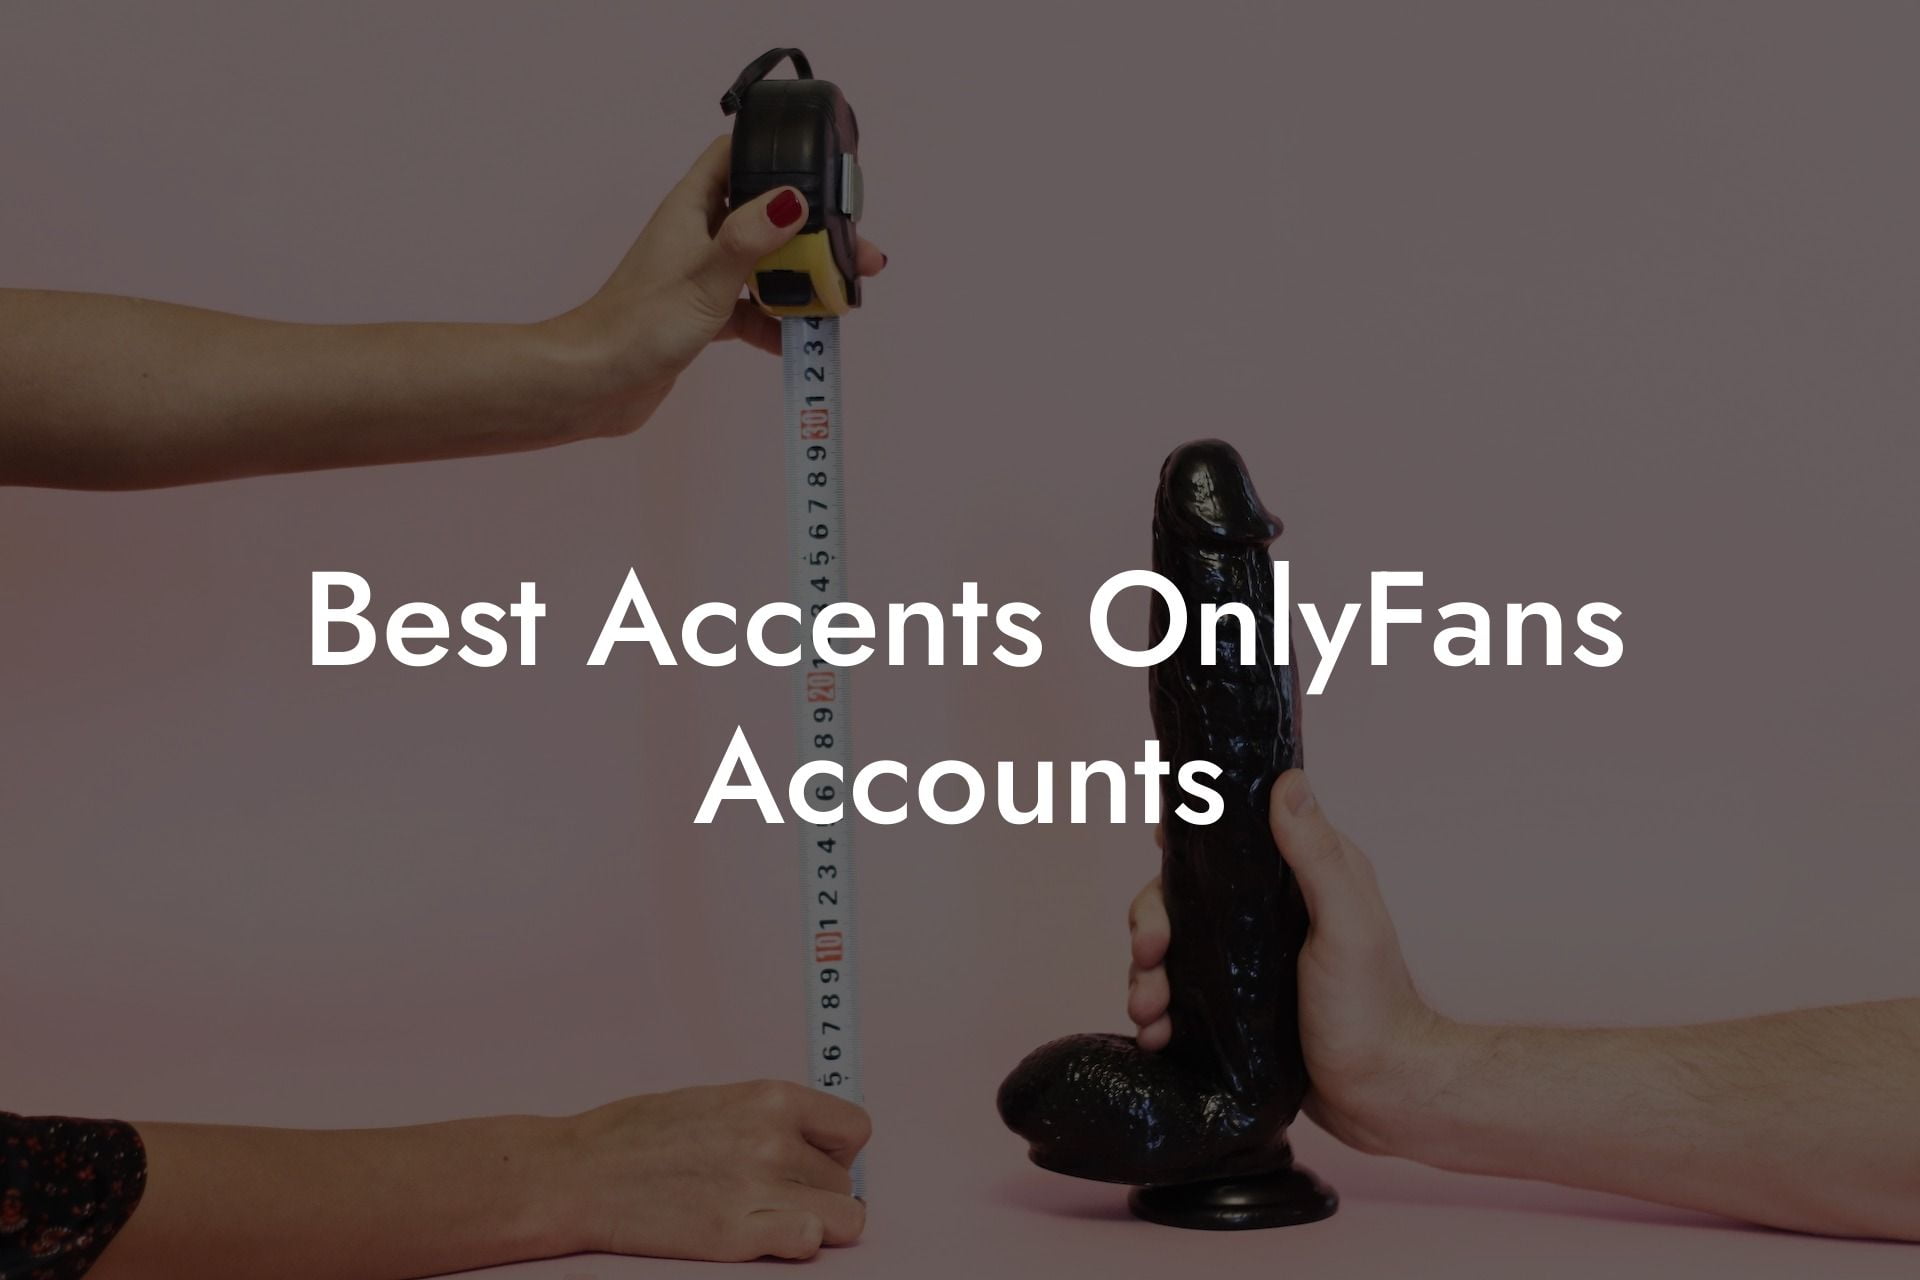 Best Accents OnlyFans Accounts